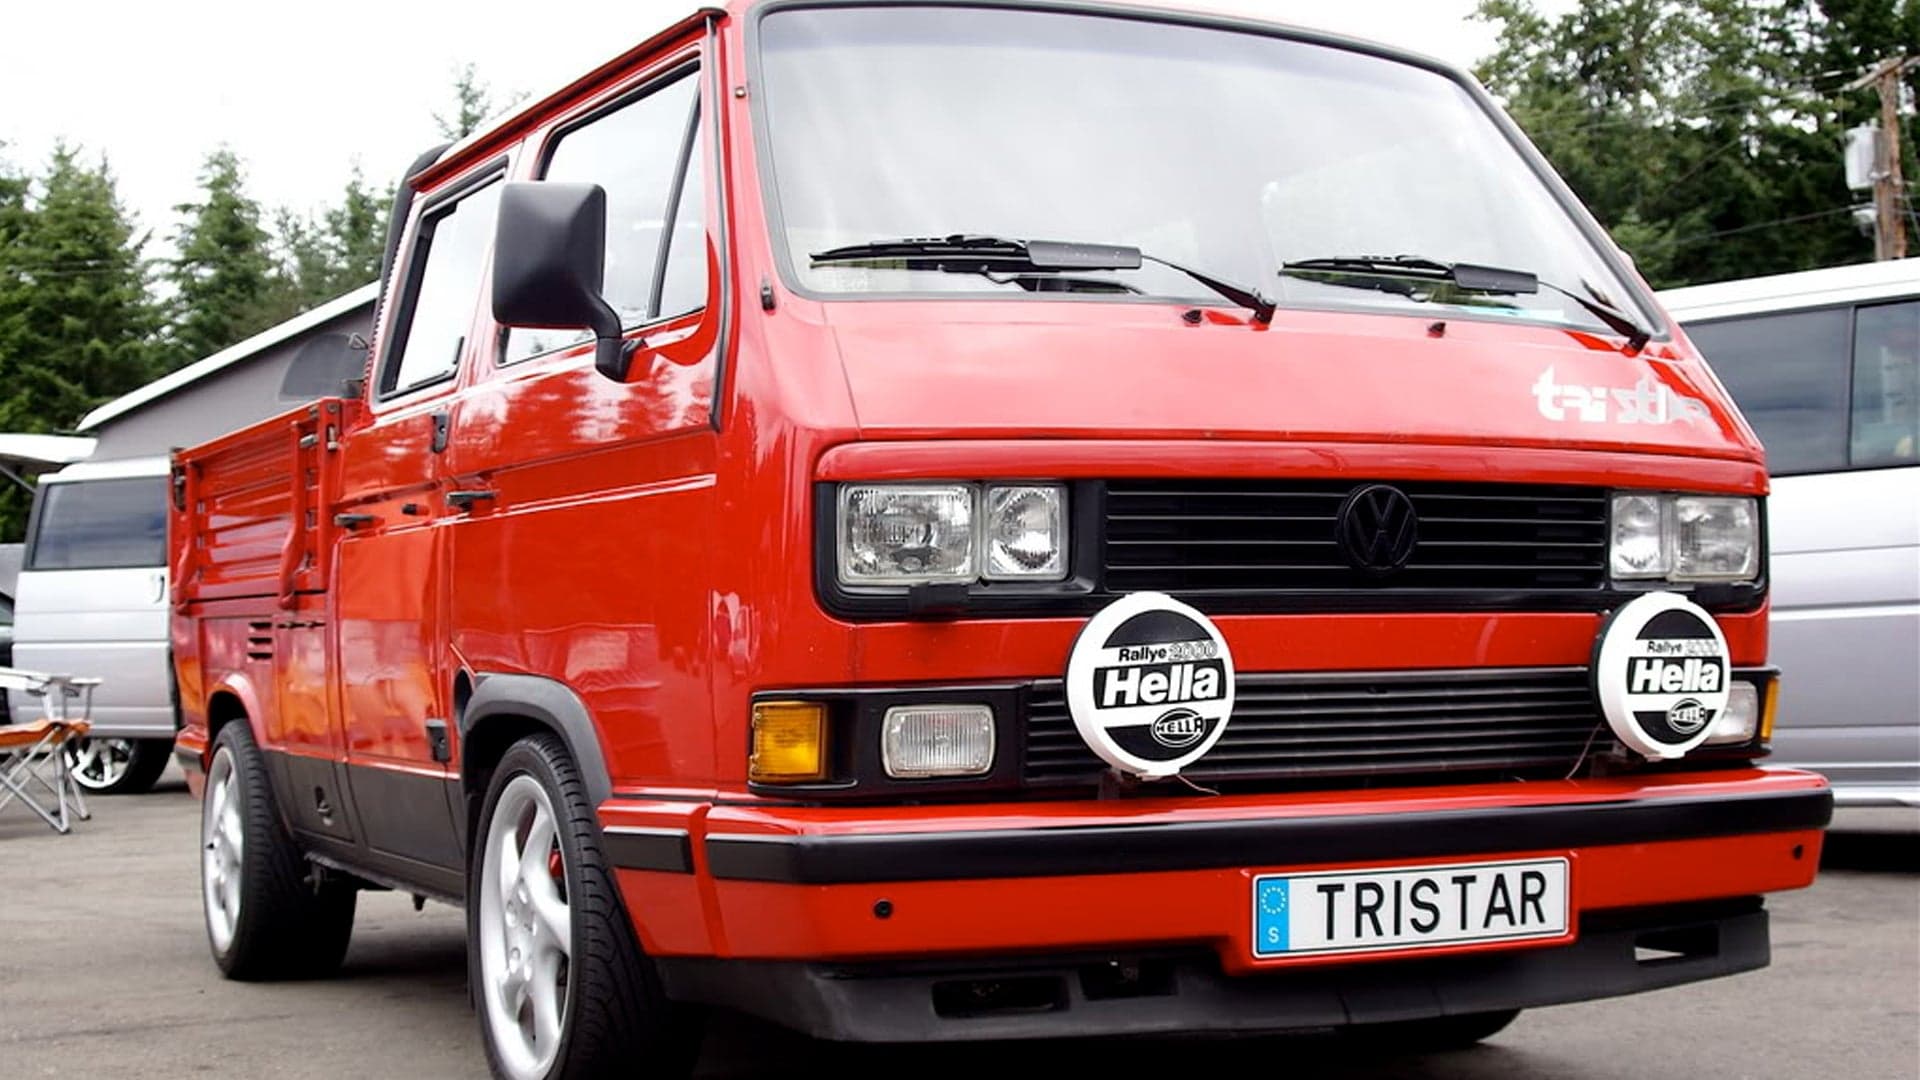 The STI-Swapped Volkswagen Tristar You’ve Always Wanted